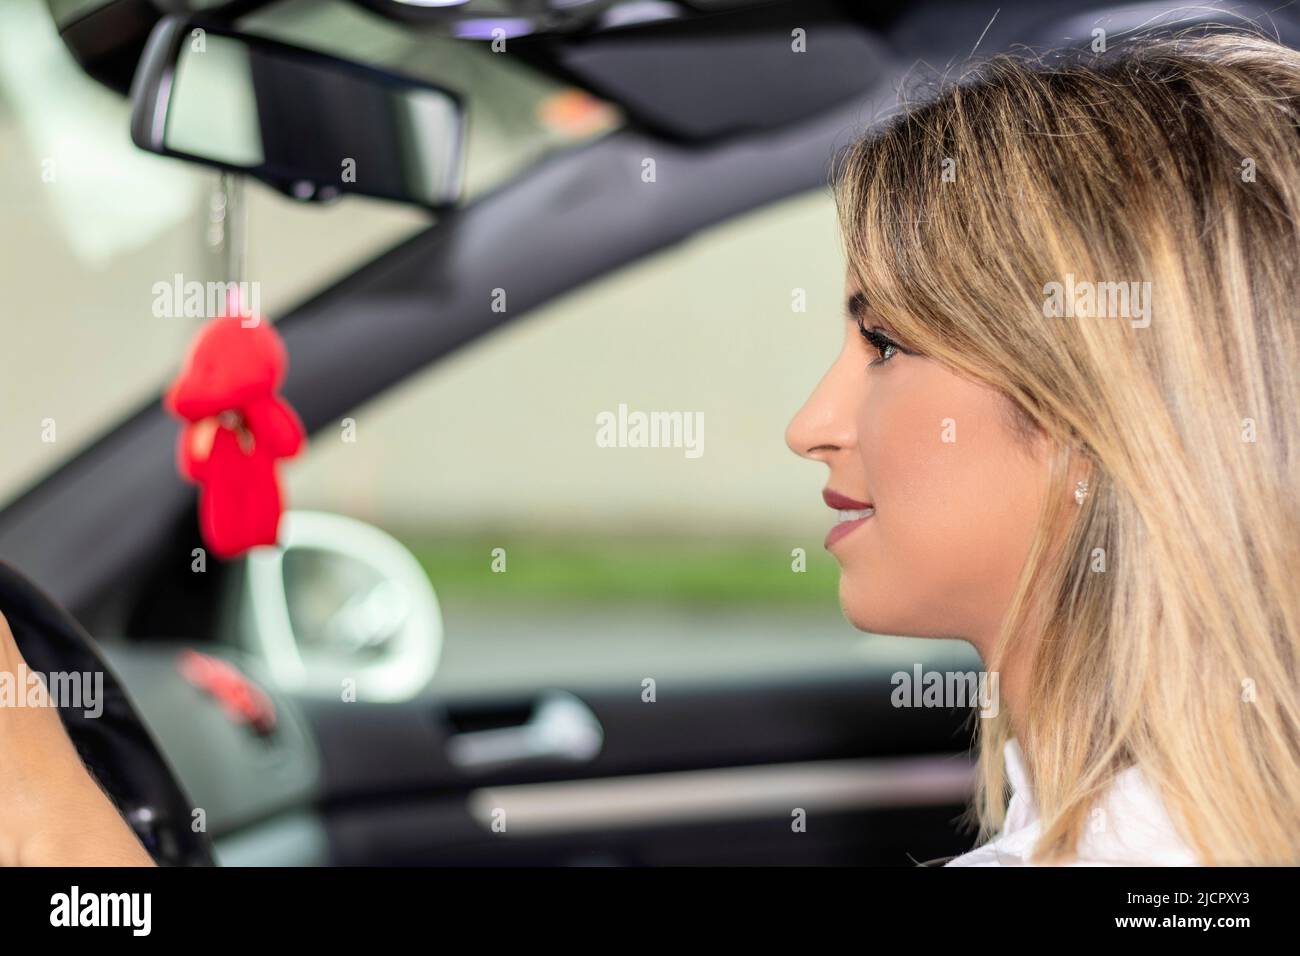 blonde woman driving without seat belt Stock Photo